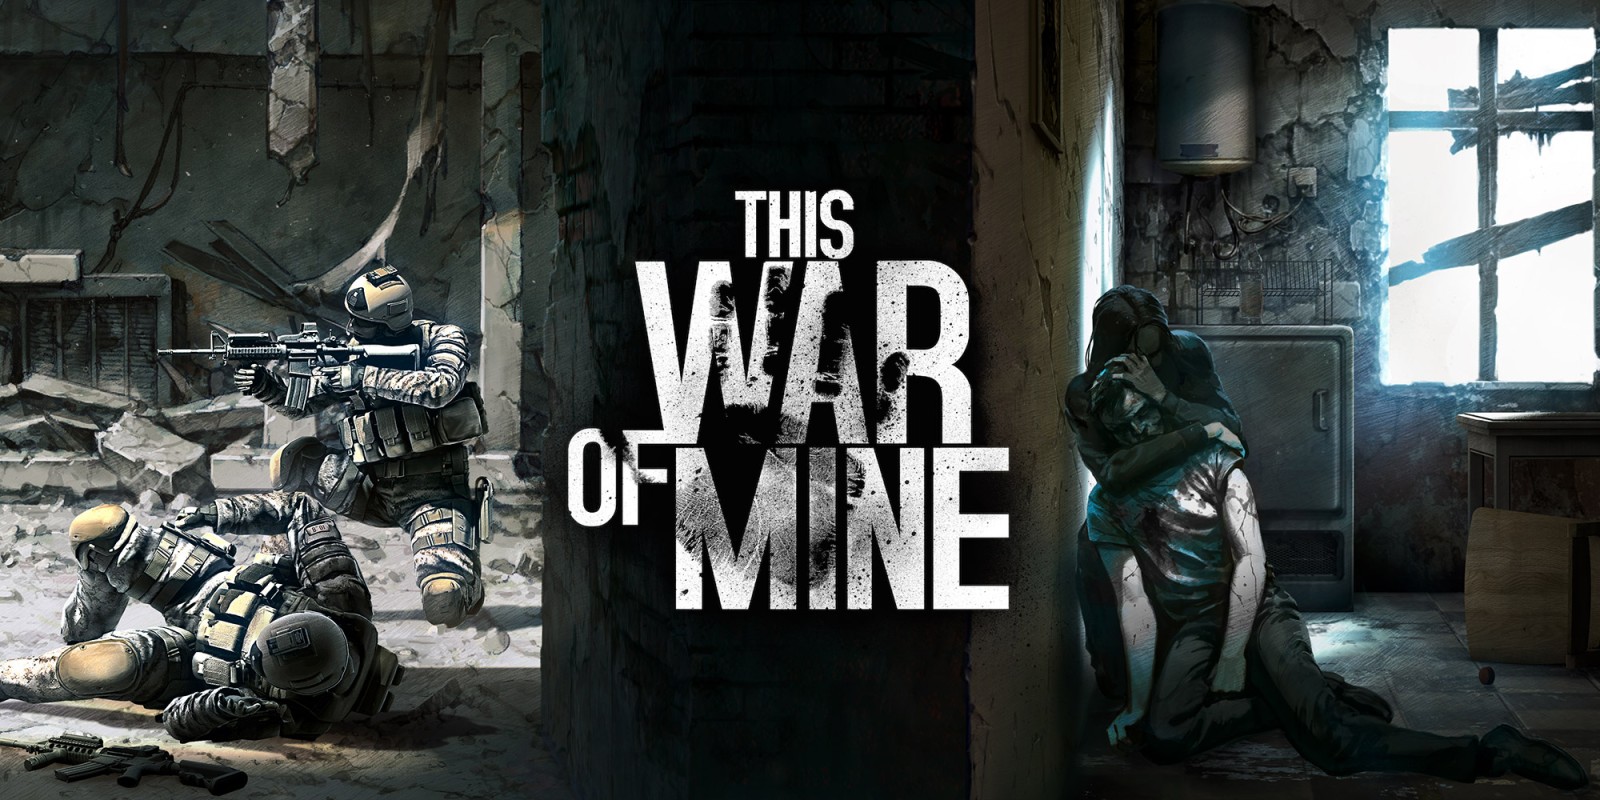 download this war of mine final cut